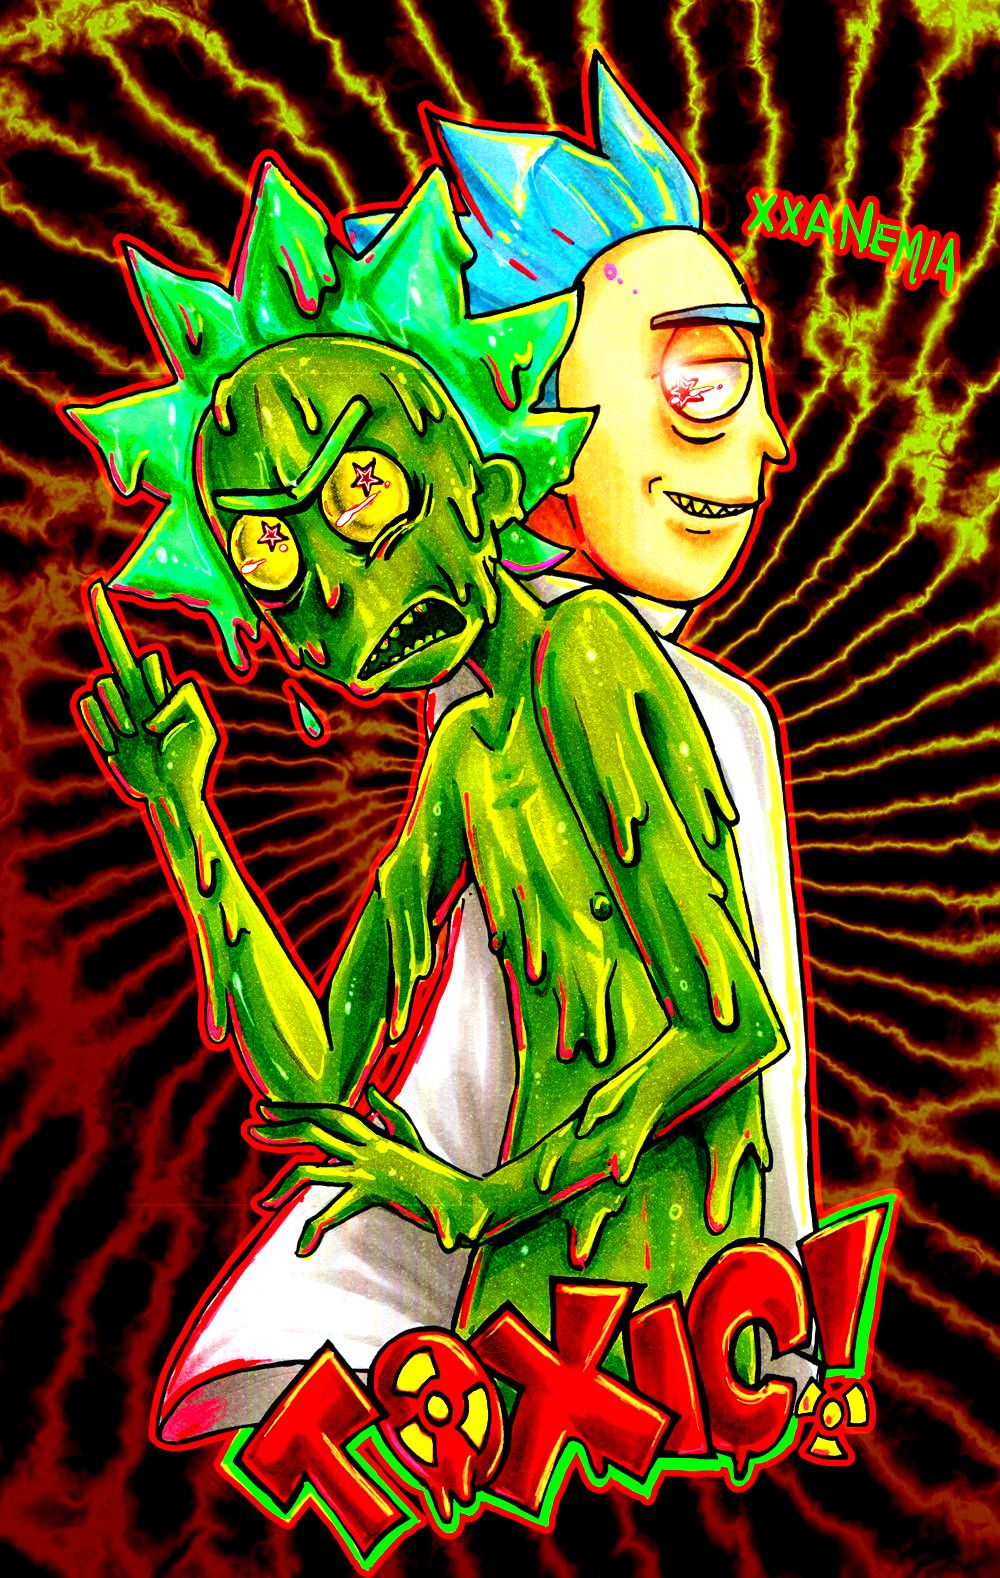 # Rick & Morty. Rick and morty poster, Rick and morty image, Rick and morty tattoo